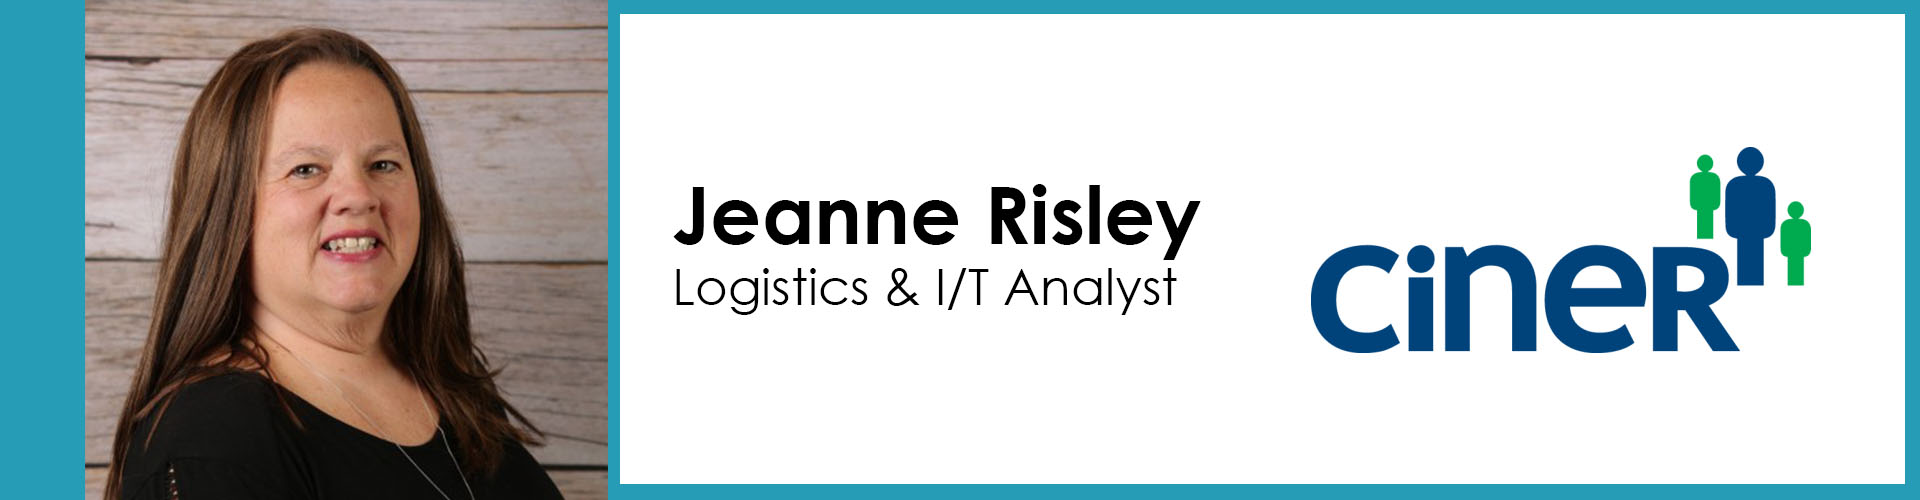 title graphic with picture-jeanne-risley